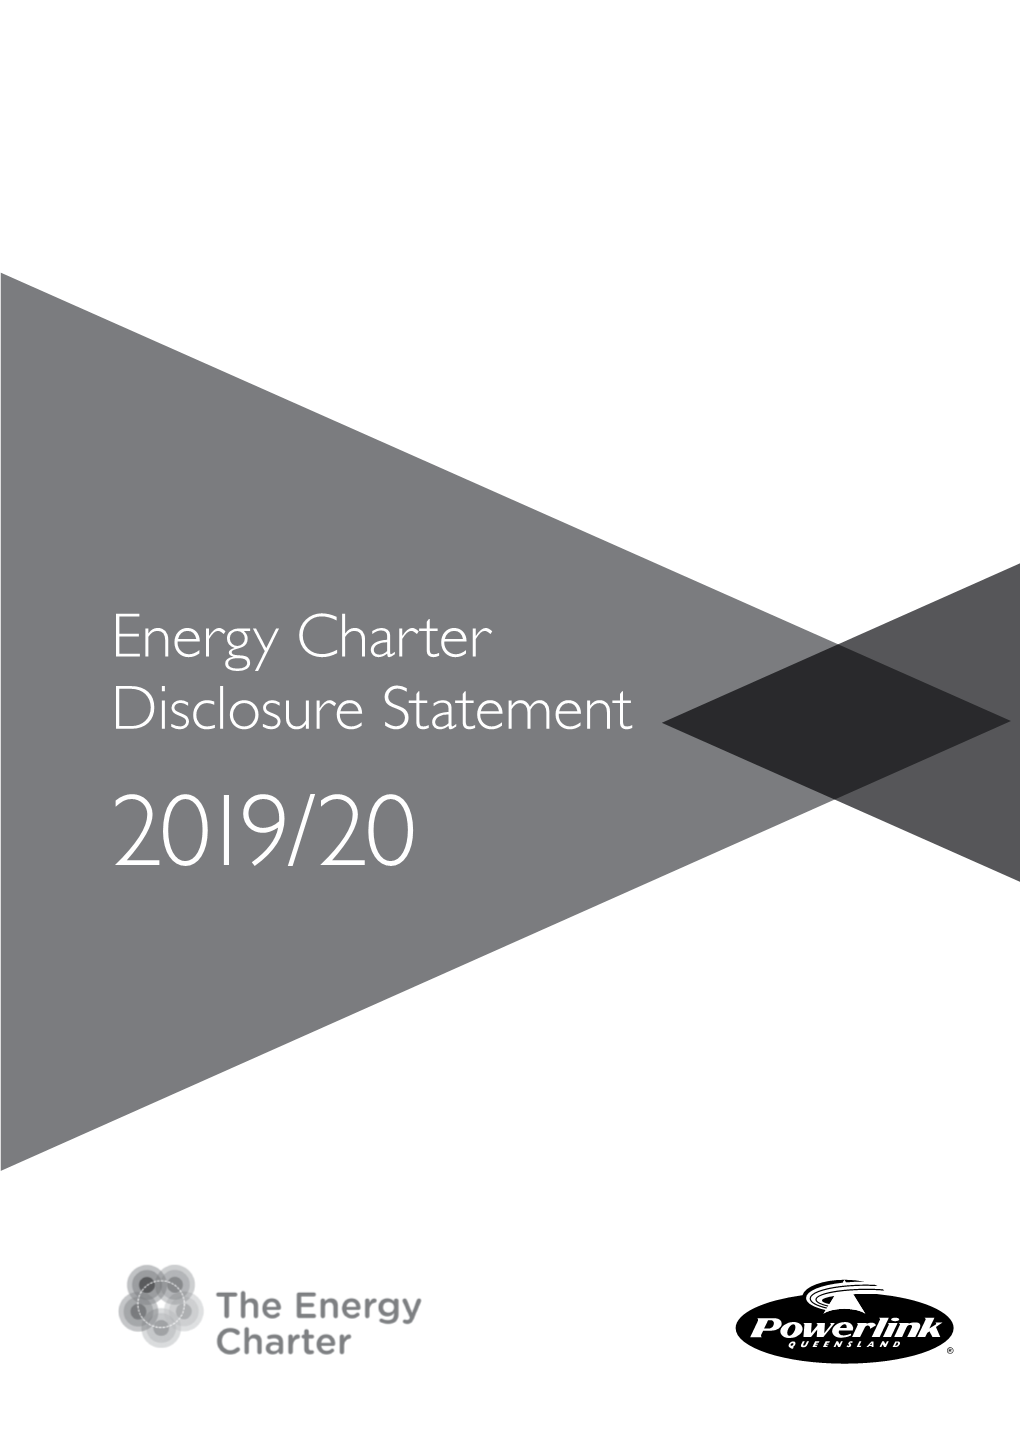 Energy Charter Disclosure Statement 2019/20 Contents